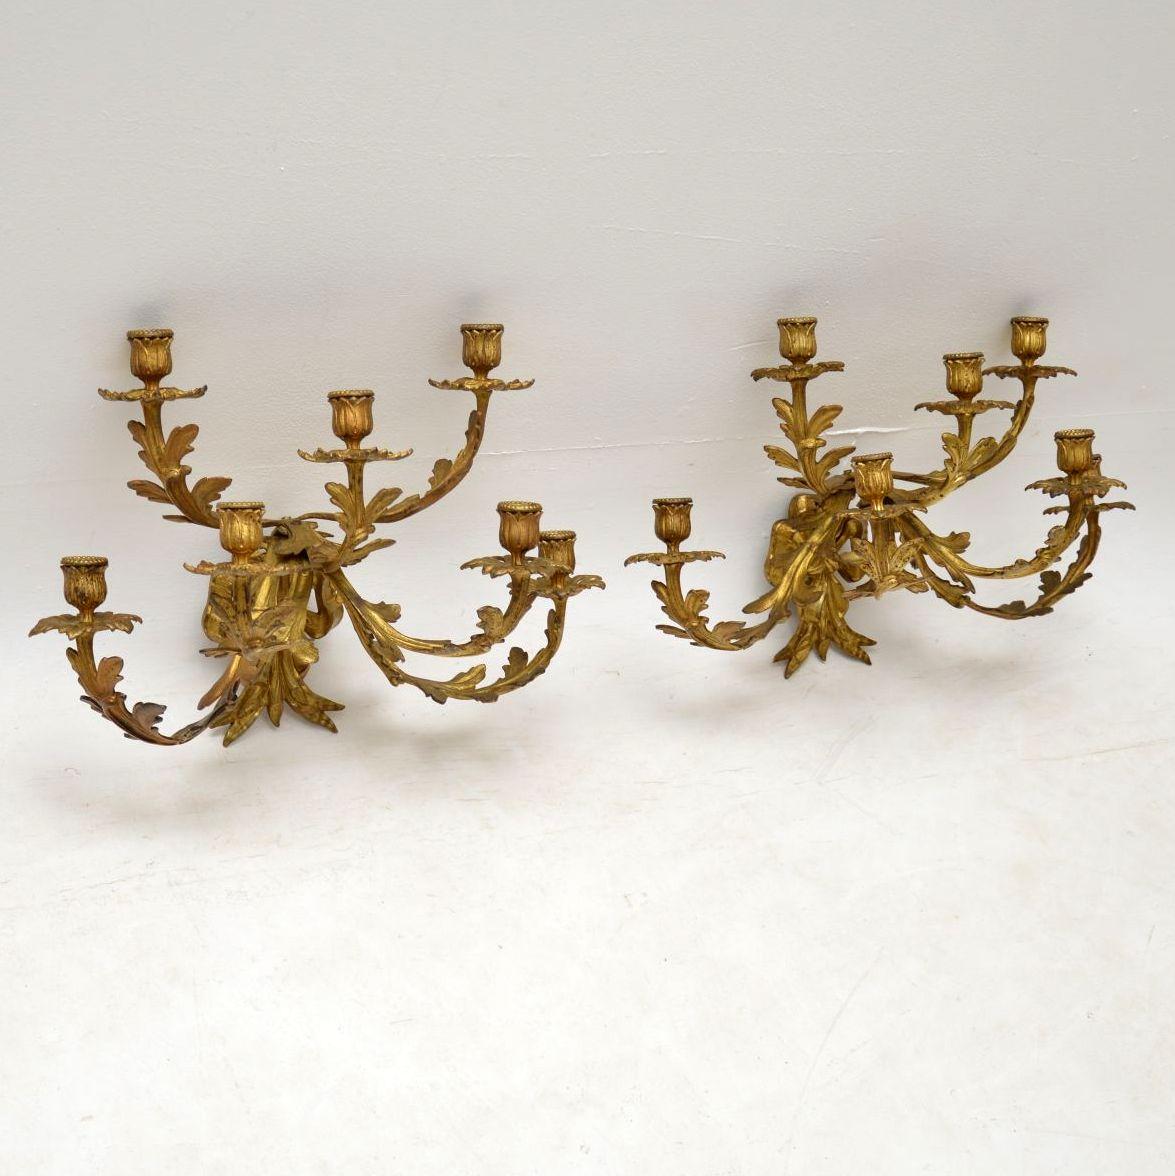 Large pair of antique French gilt bronze seven branch wall sconces in wonderful original condition with all the candleholders in place. It's nice to find examples of these that haven't been drilled and turned into lights. The castings and fine